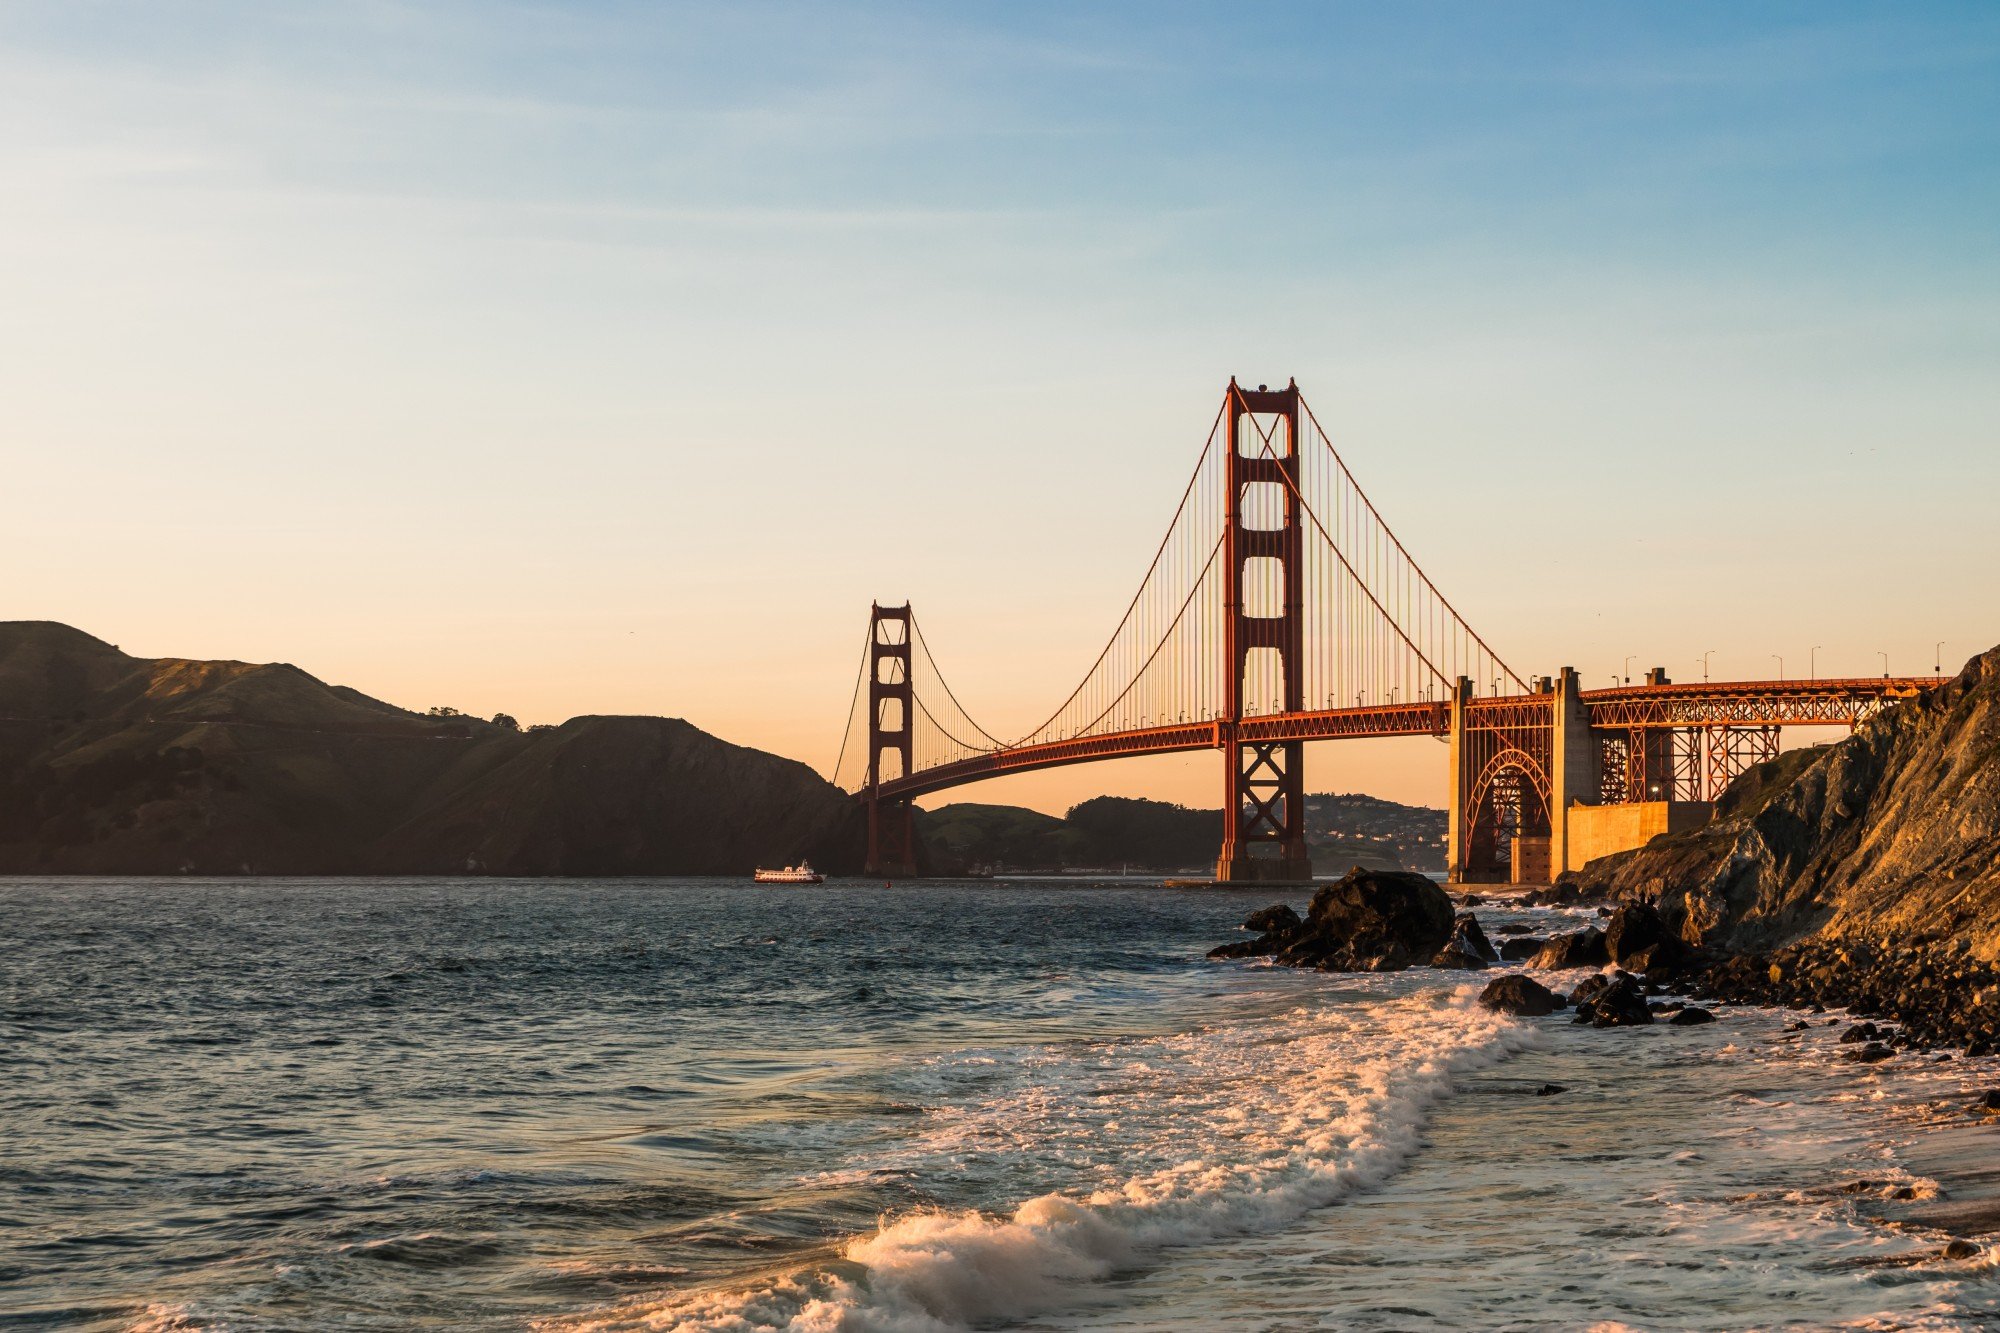 The Latest Real Estate News and Market Updates in San Francisco, CA